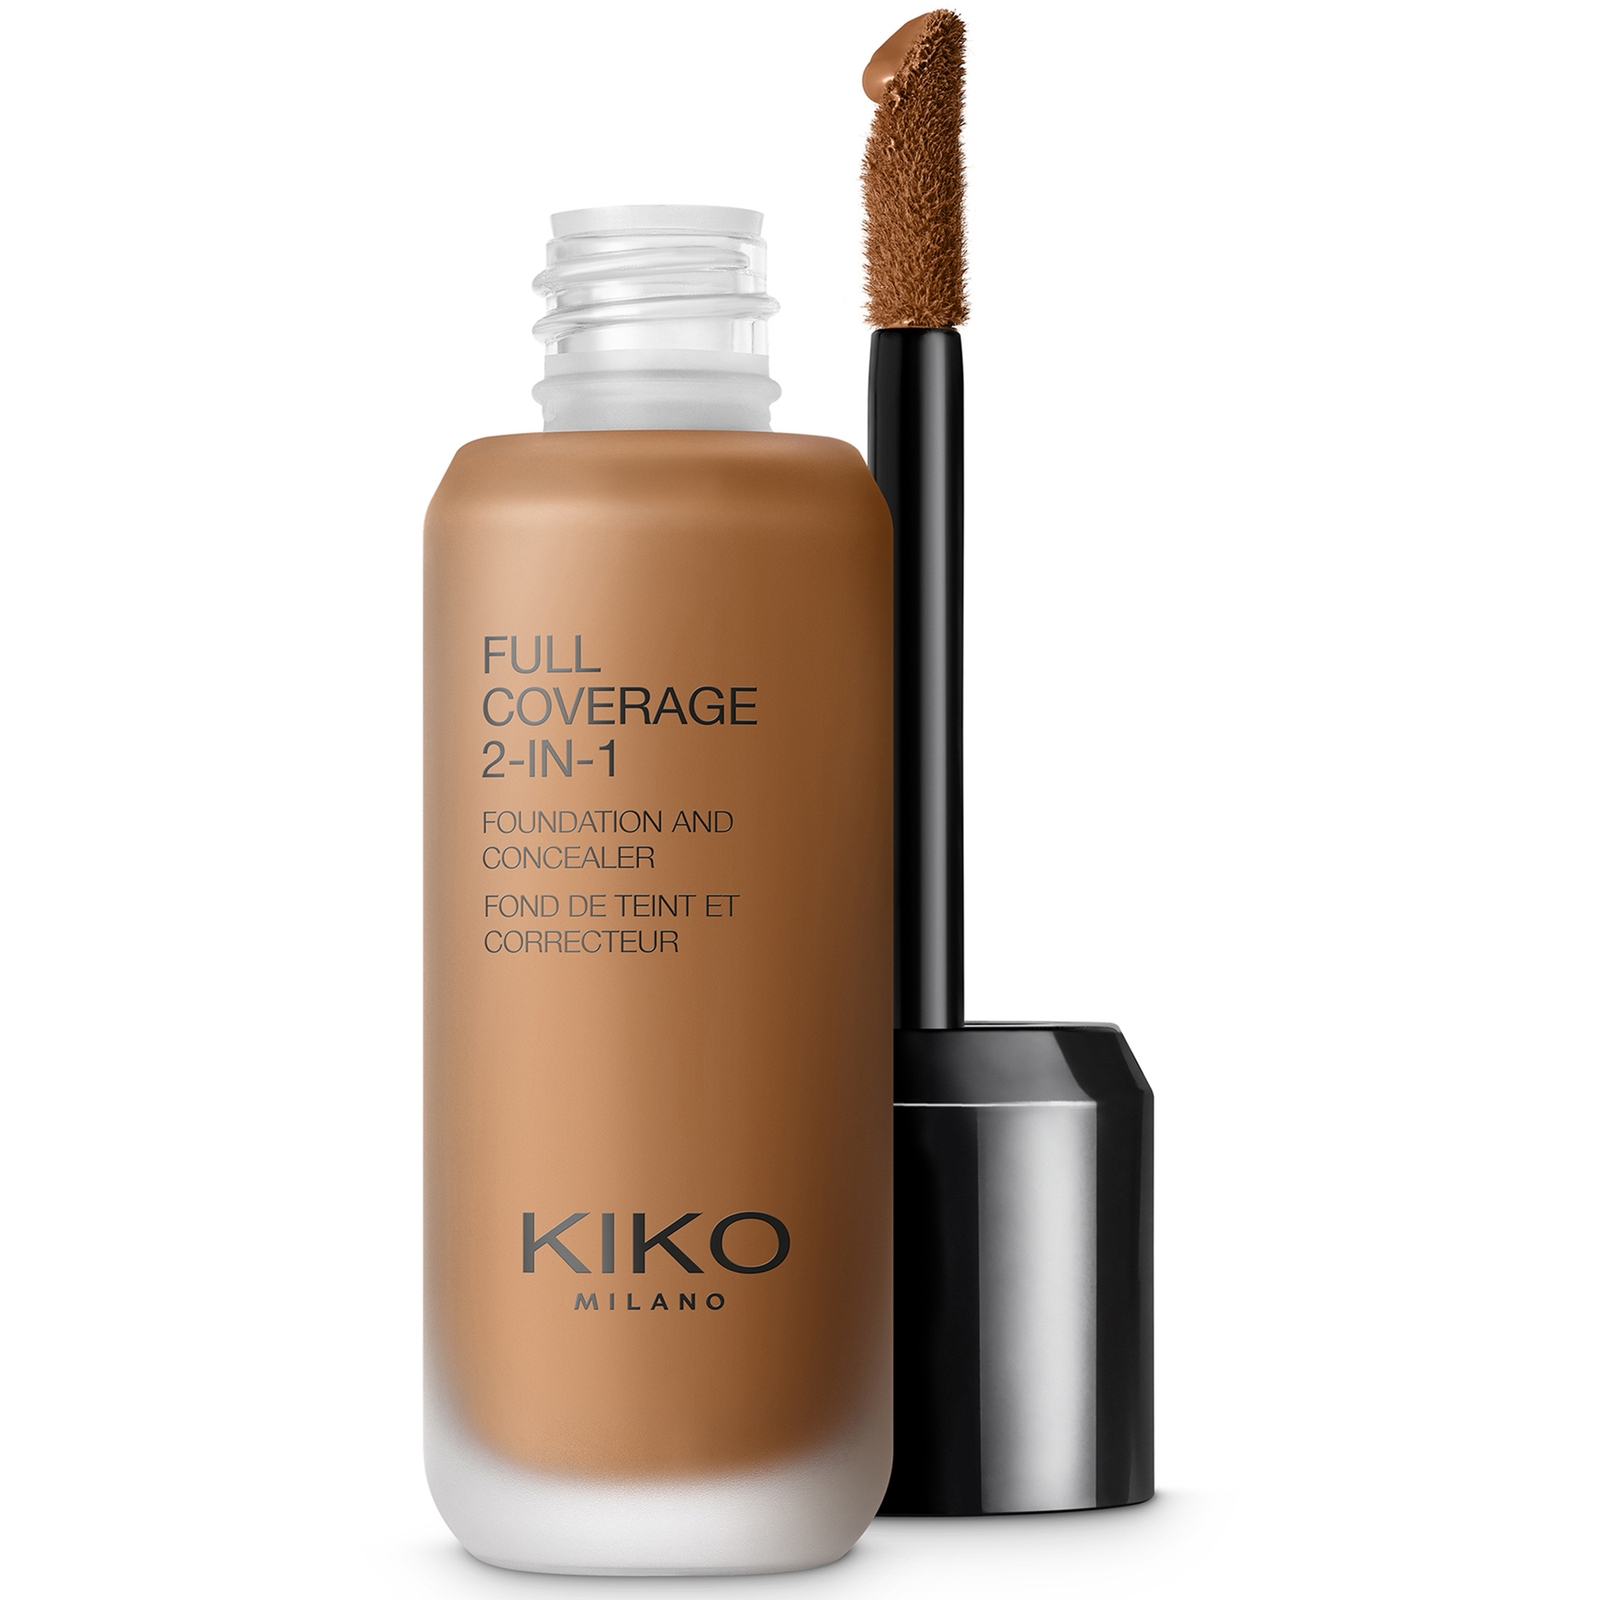 KIKO Milano Full Coverage 2-in-1 Foundation and Concealer 25ml (Various Shades) - 110 Neutral